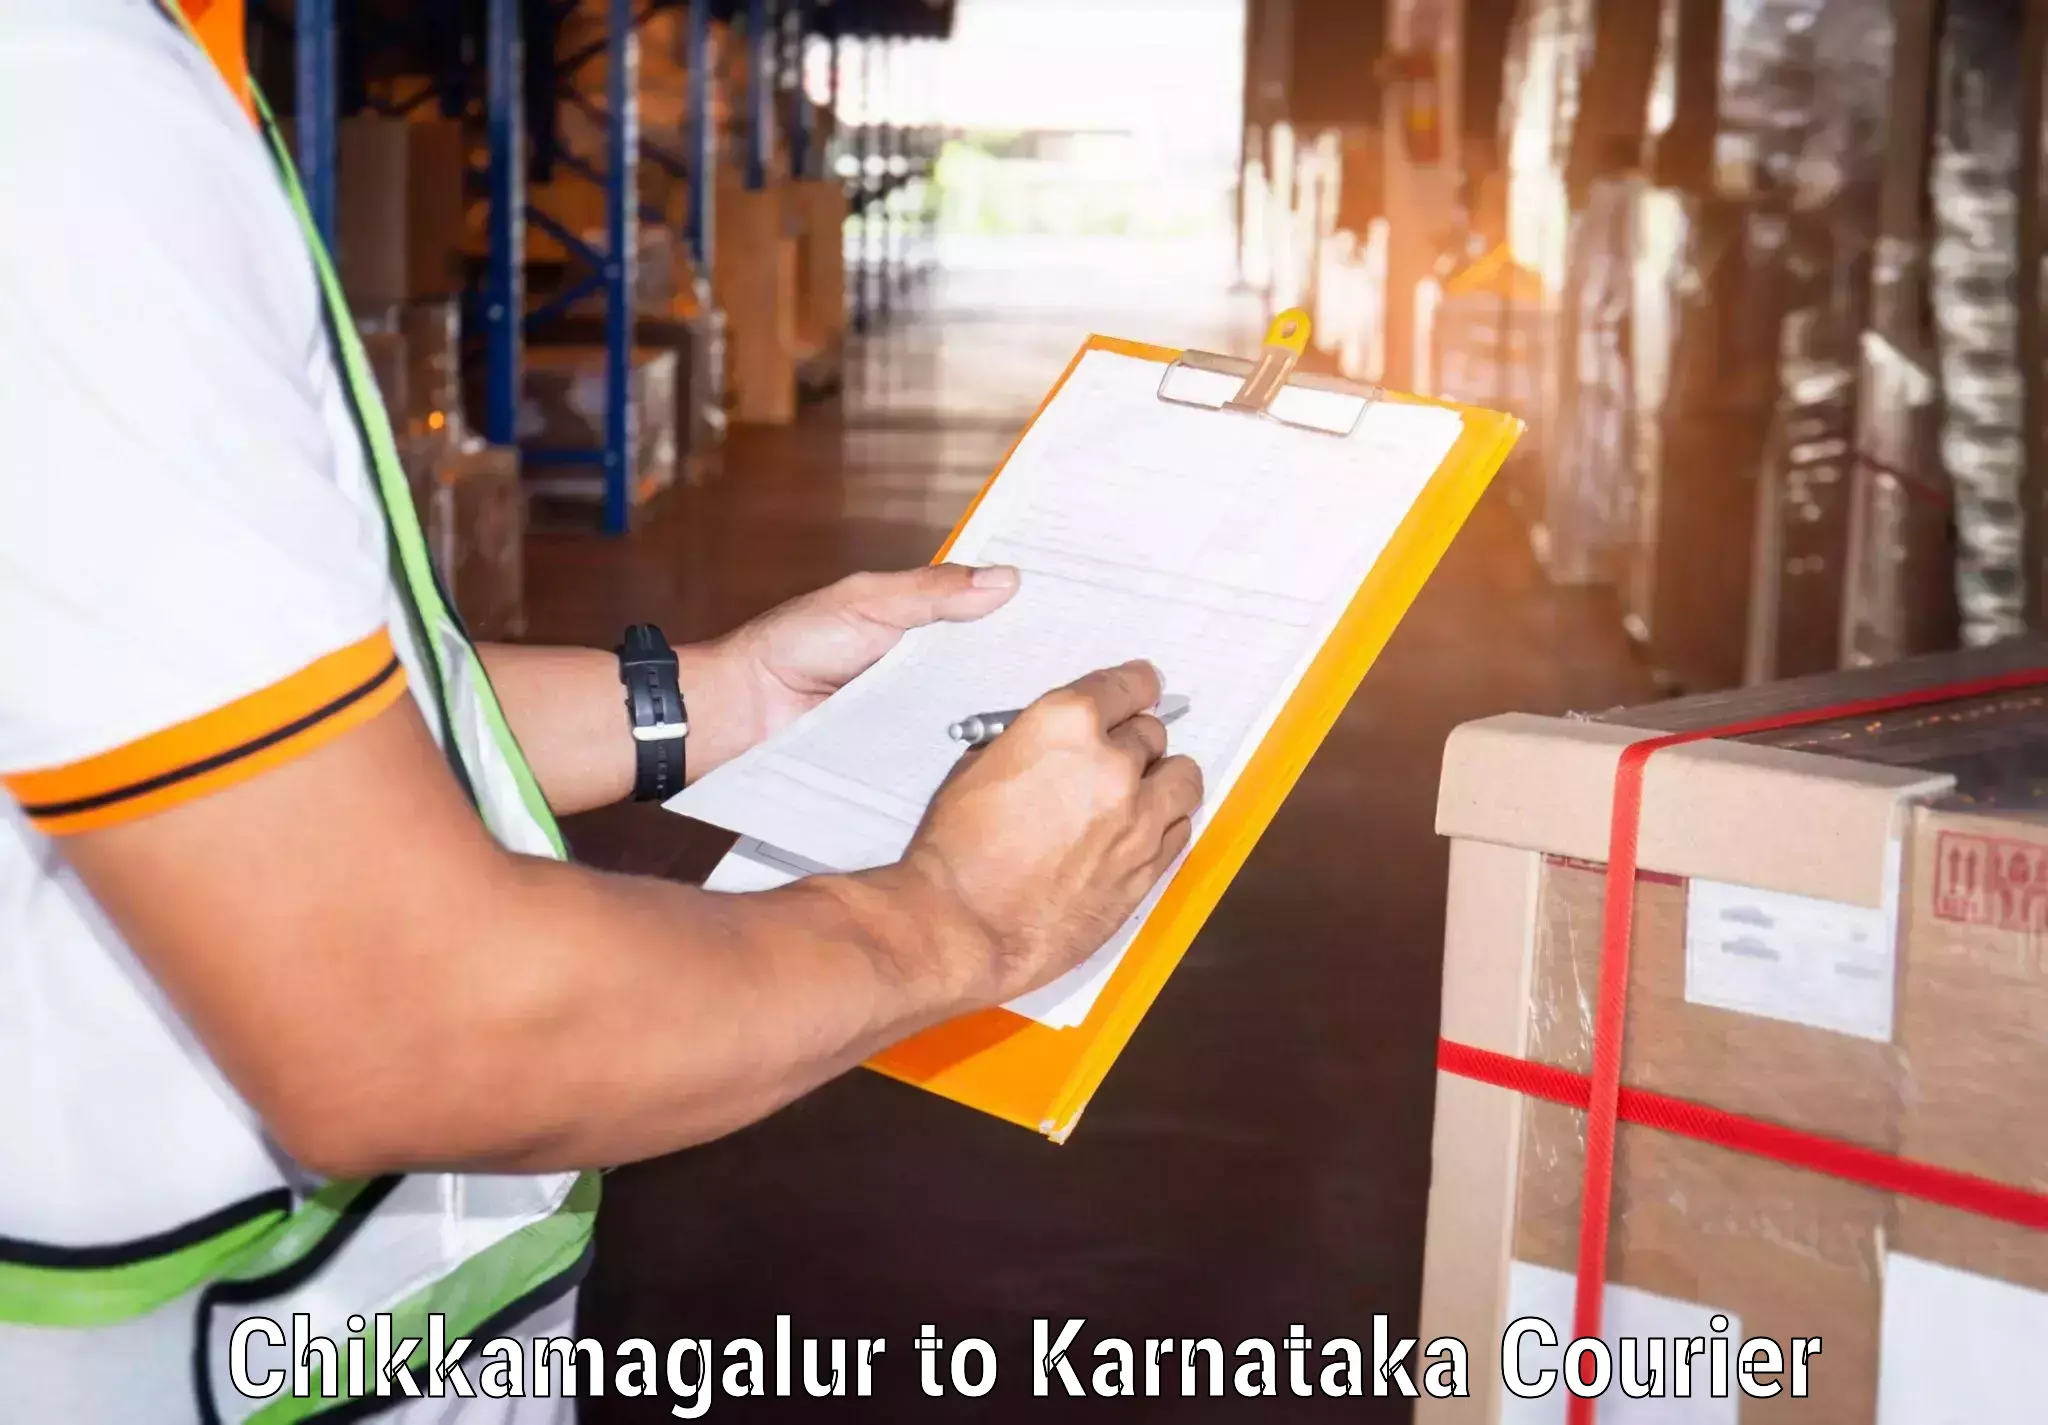 Courier service booking Chikkamagalur to Tavarekere